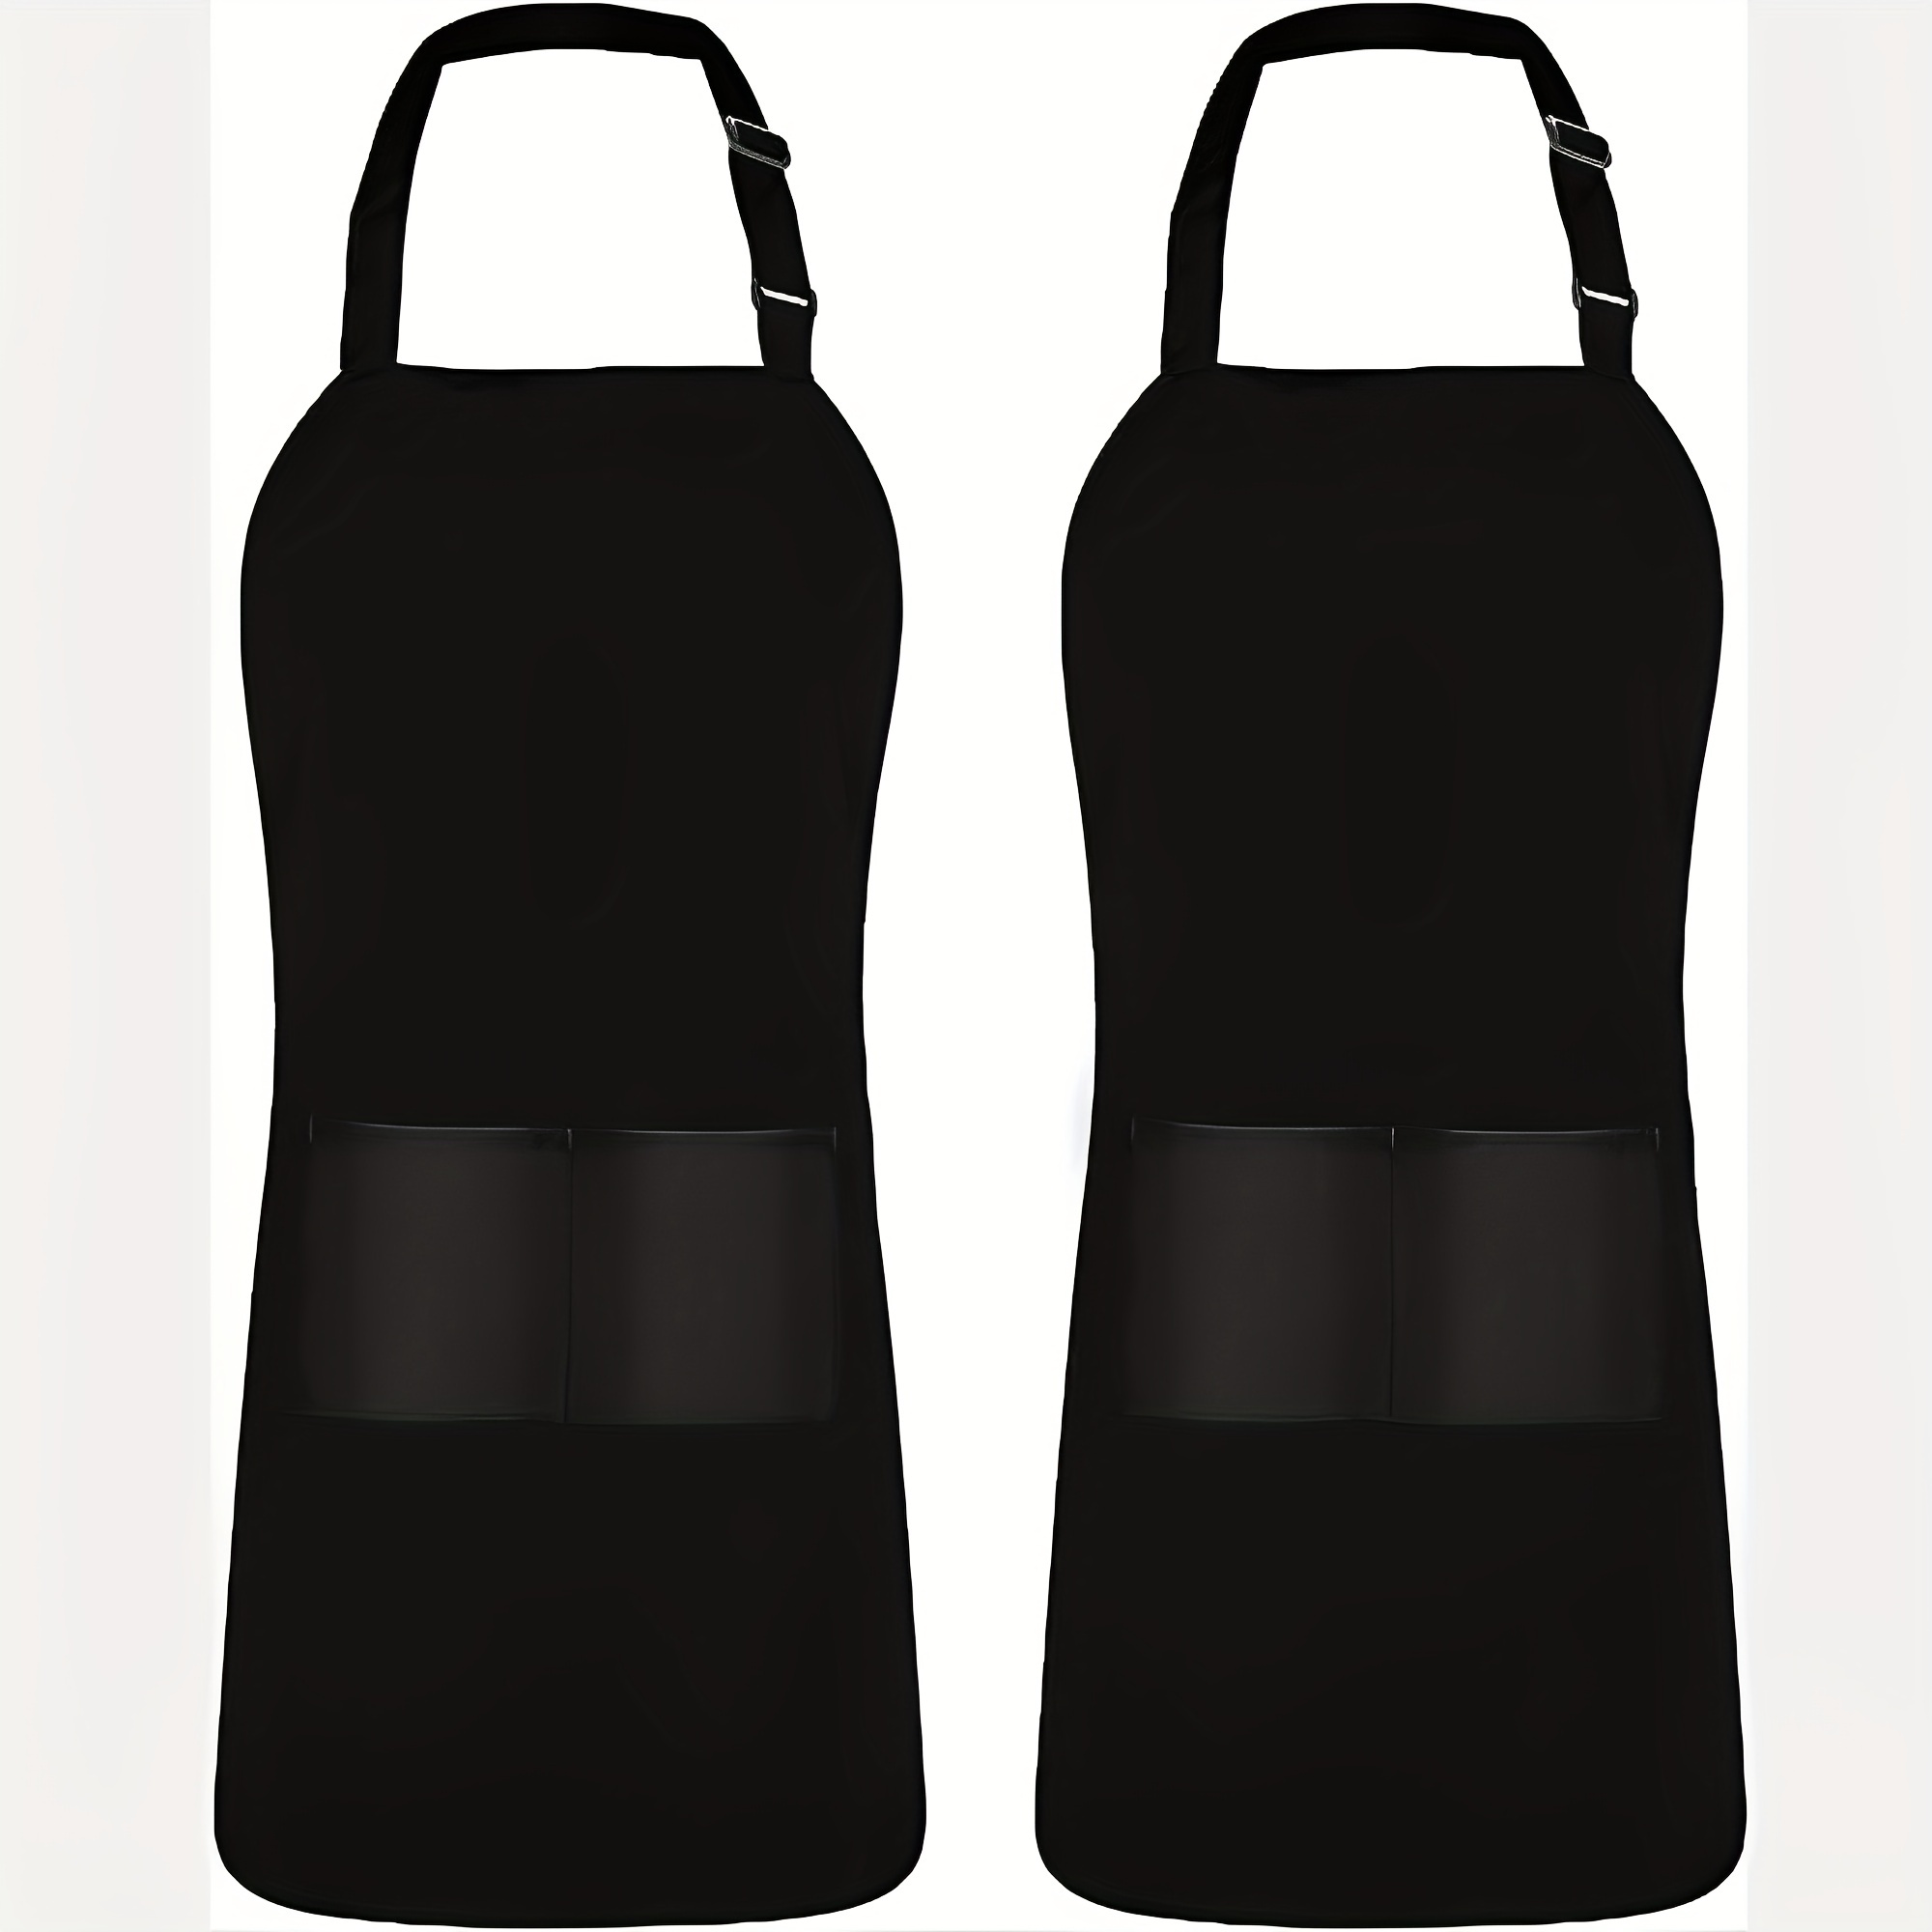 

2 Packs, Bib Aprons, Adjustable With 2 Pockets, Waterproof And Oil Resistant, Cooking Kitchen Chef Aprons For Women Men